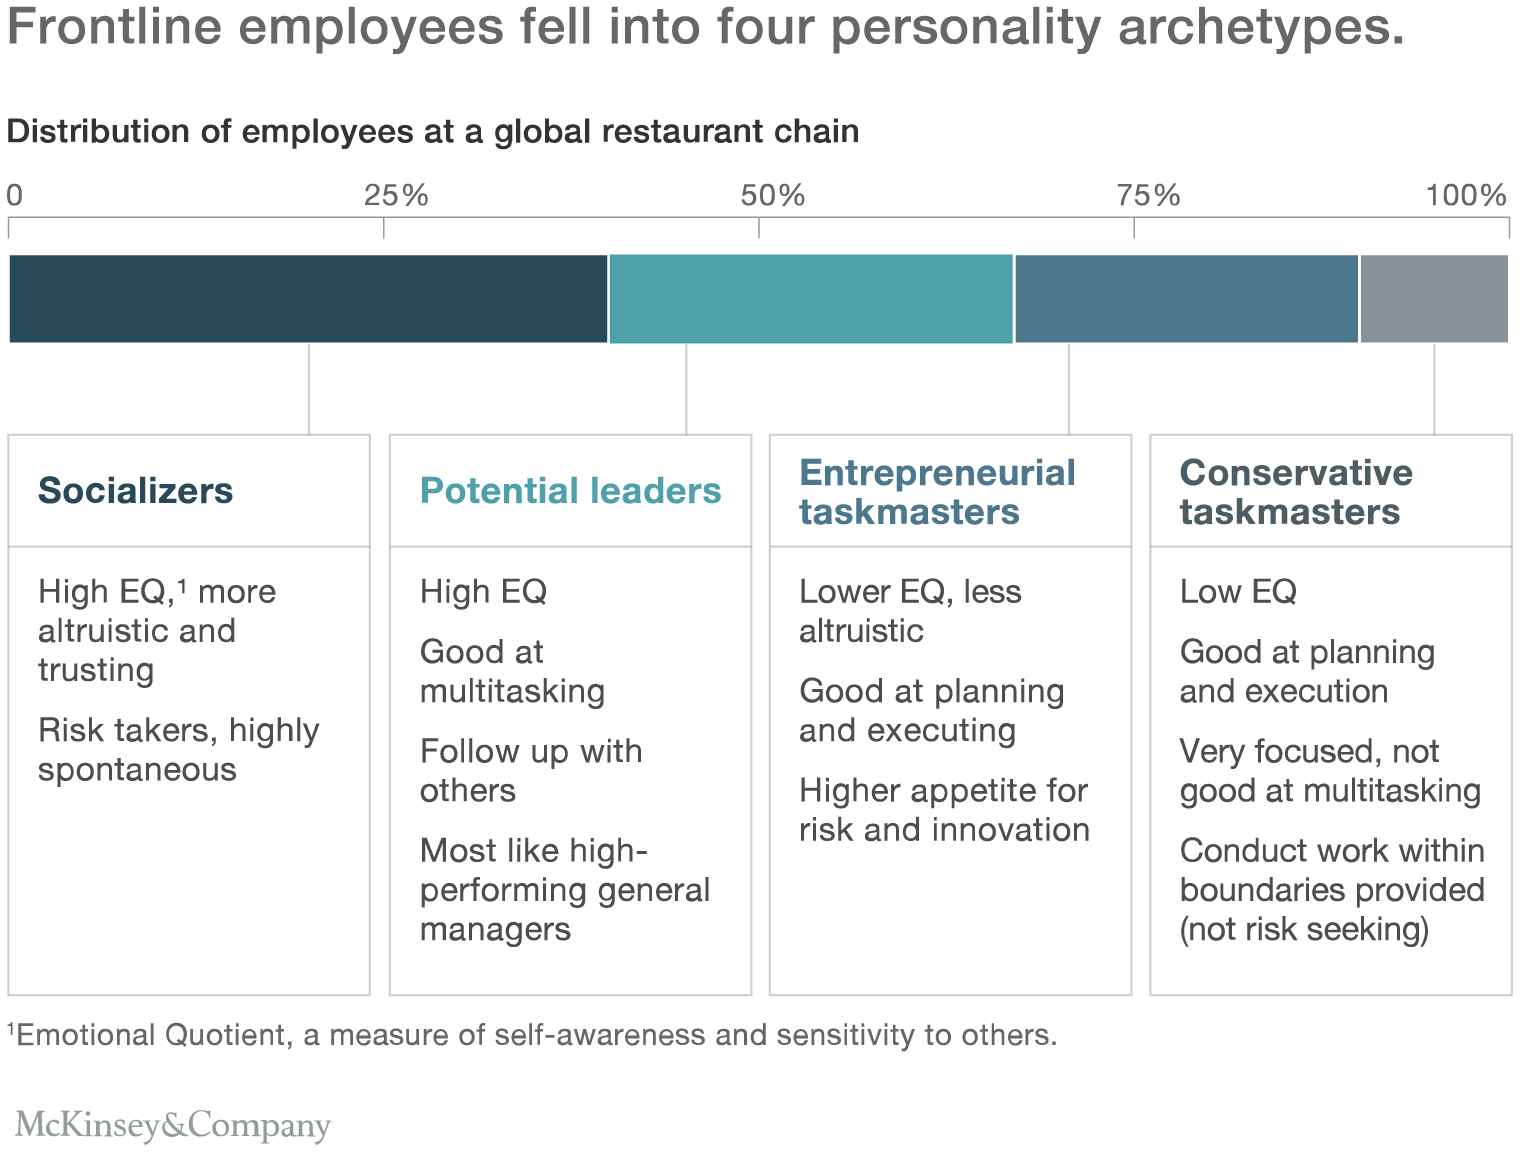 Frontline employees fell into four personality archetypes.